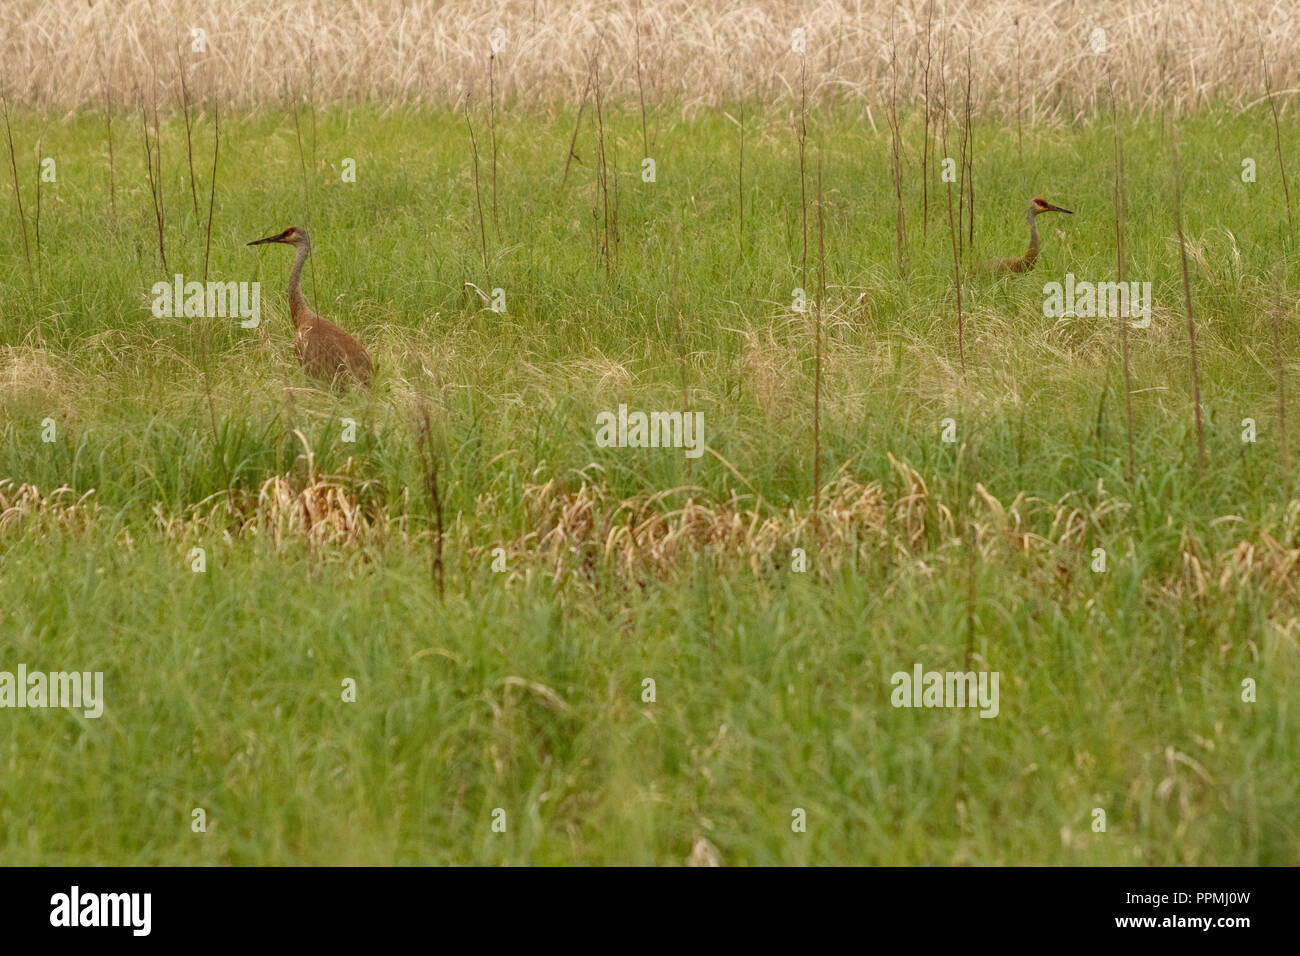 Pair of Sandhill Cranes in Tall Grass Stock Photo